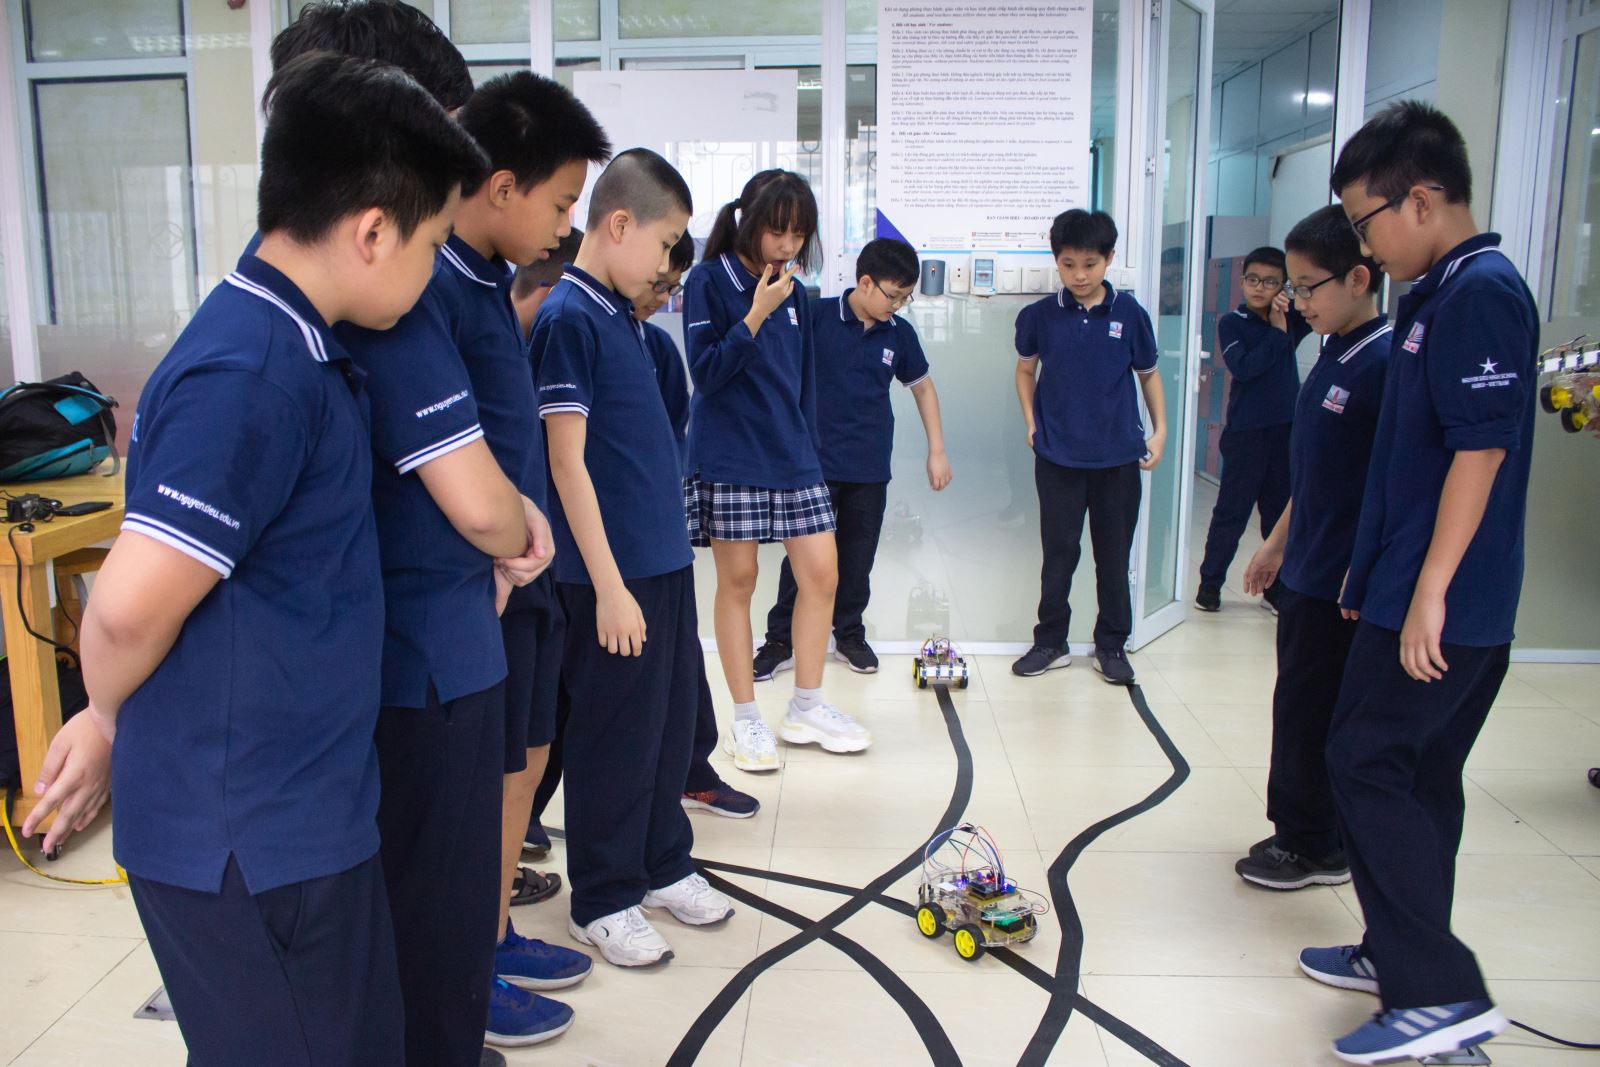 Robotics - IoT club:  Play hard and nurture passion for science harder!